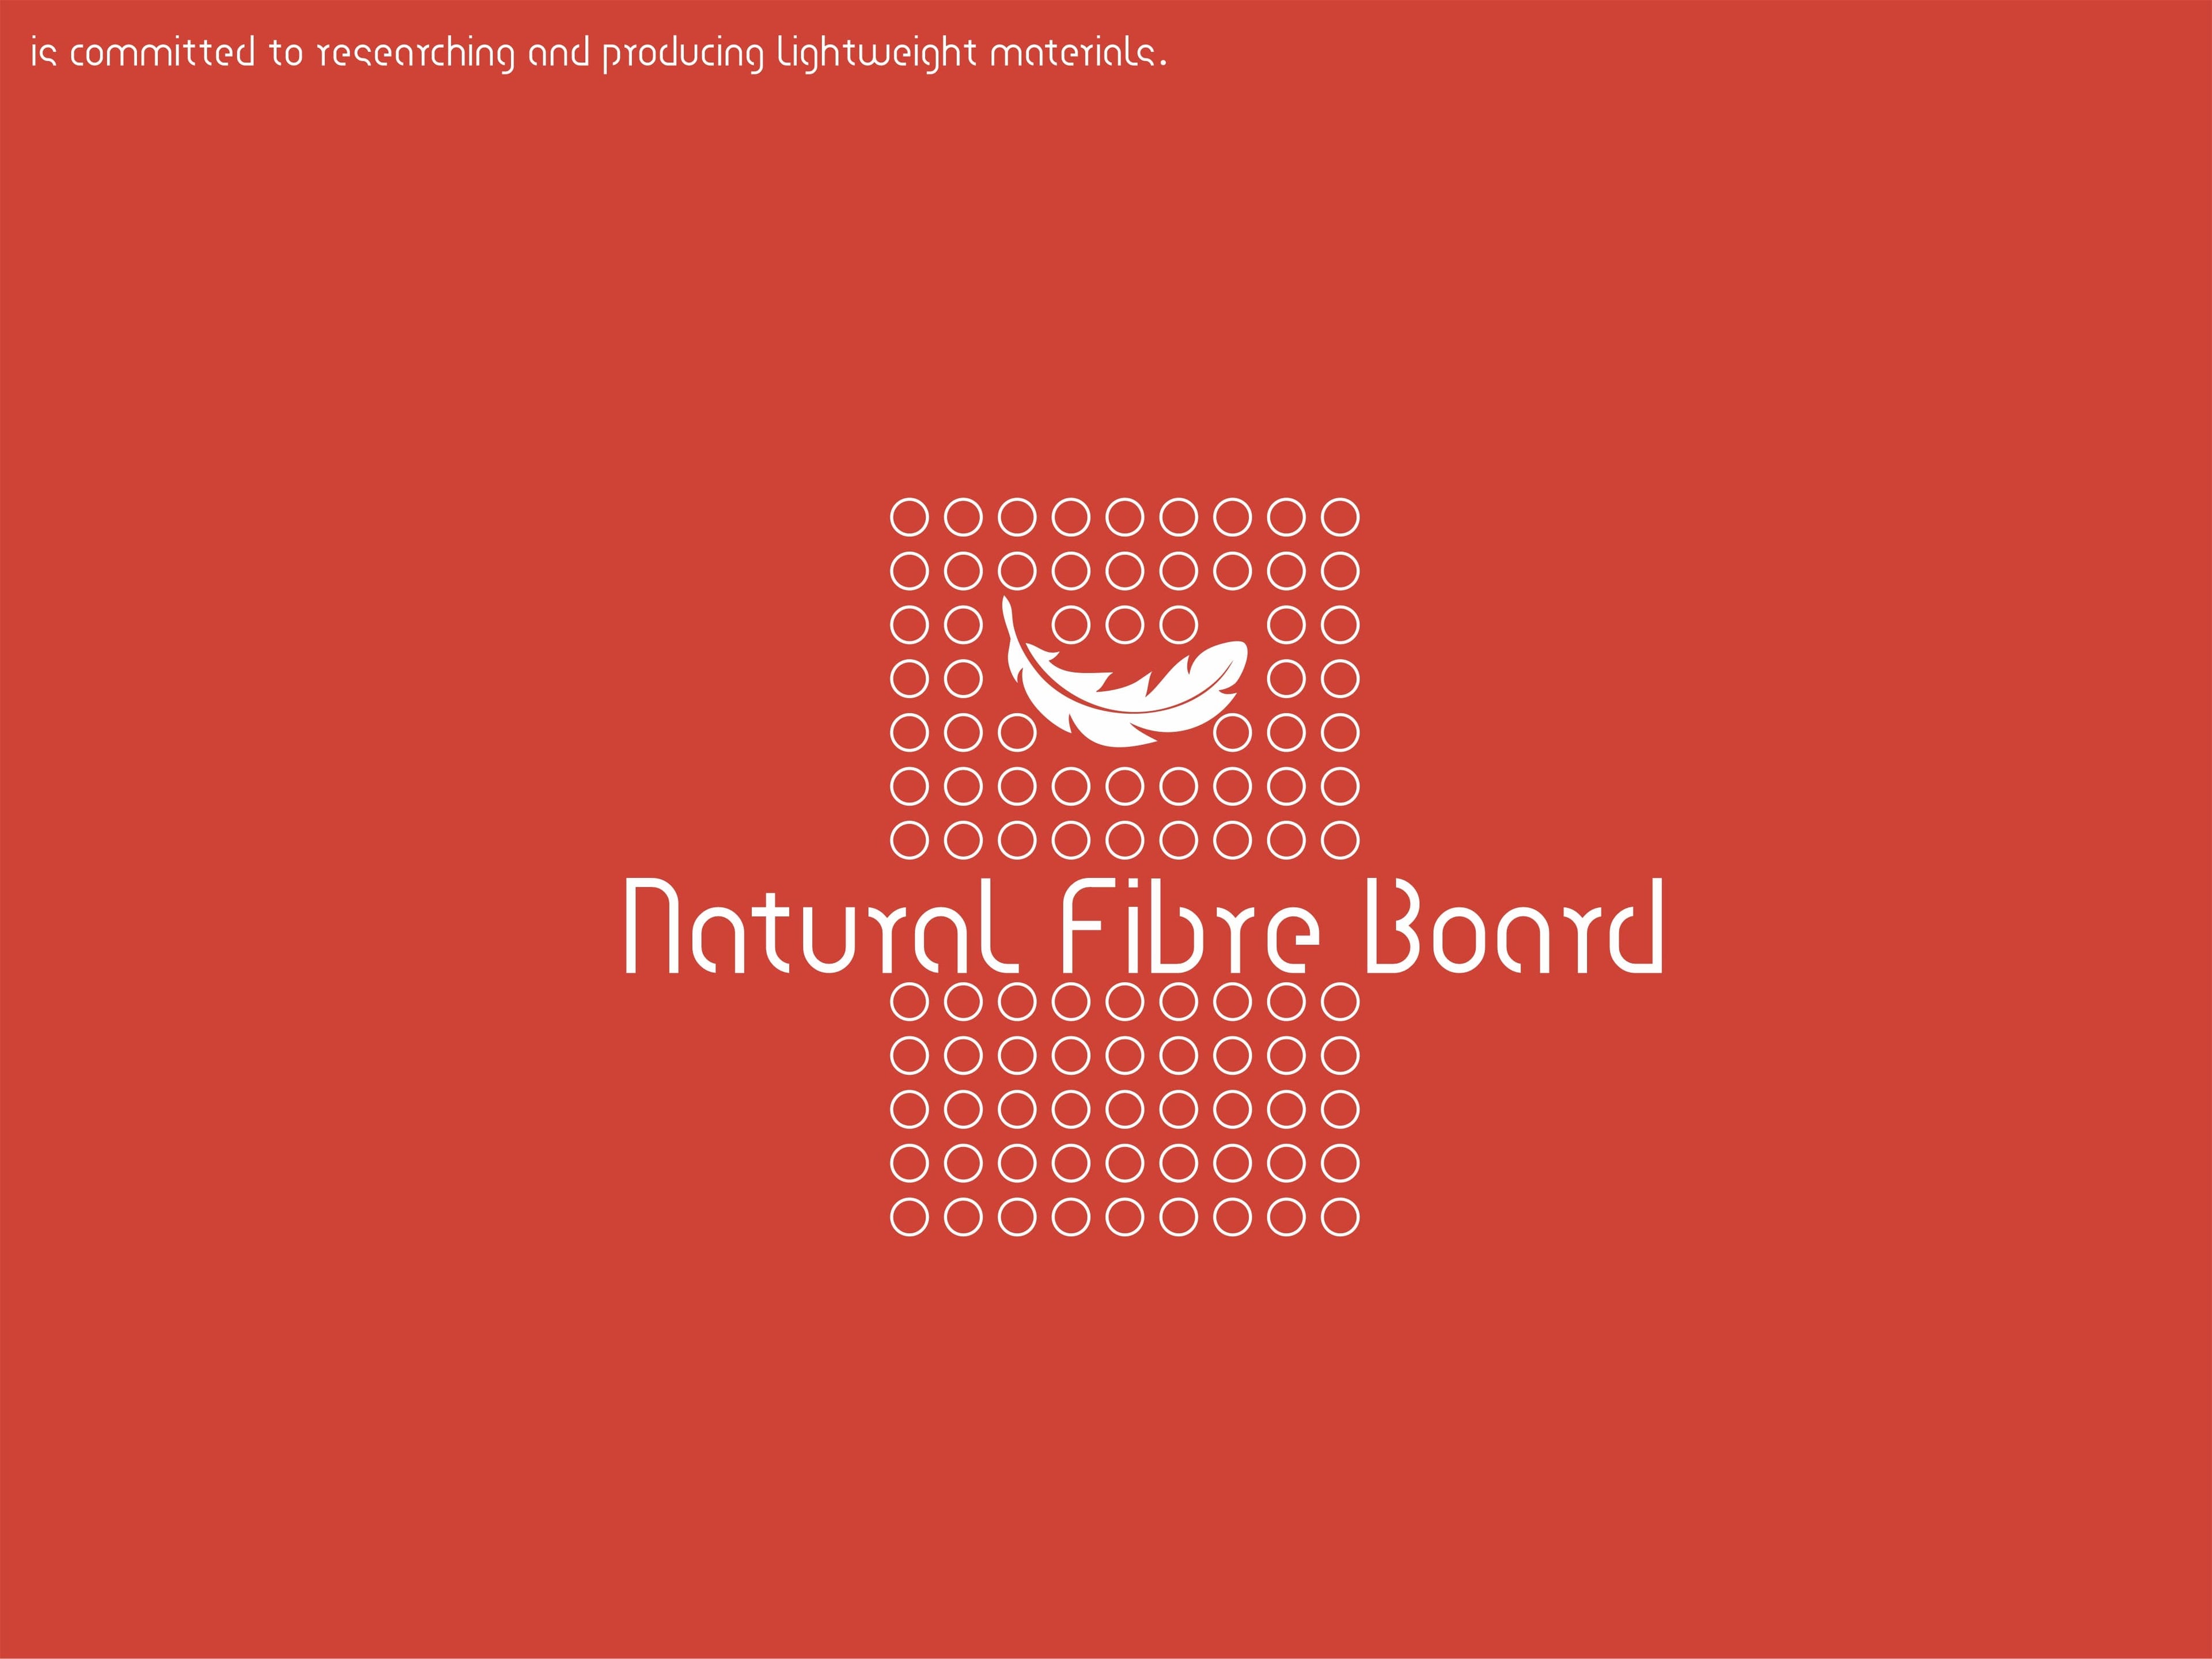 Logo of Natural Fibre Board featuring a feather to represent the company's focus on lightweight materials